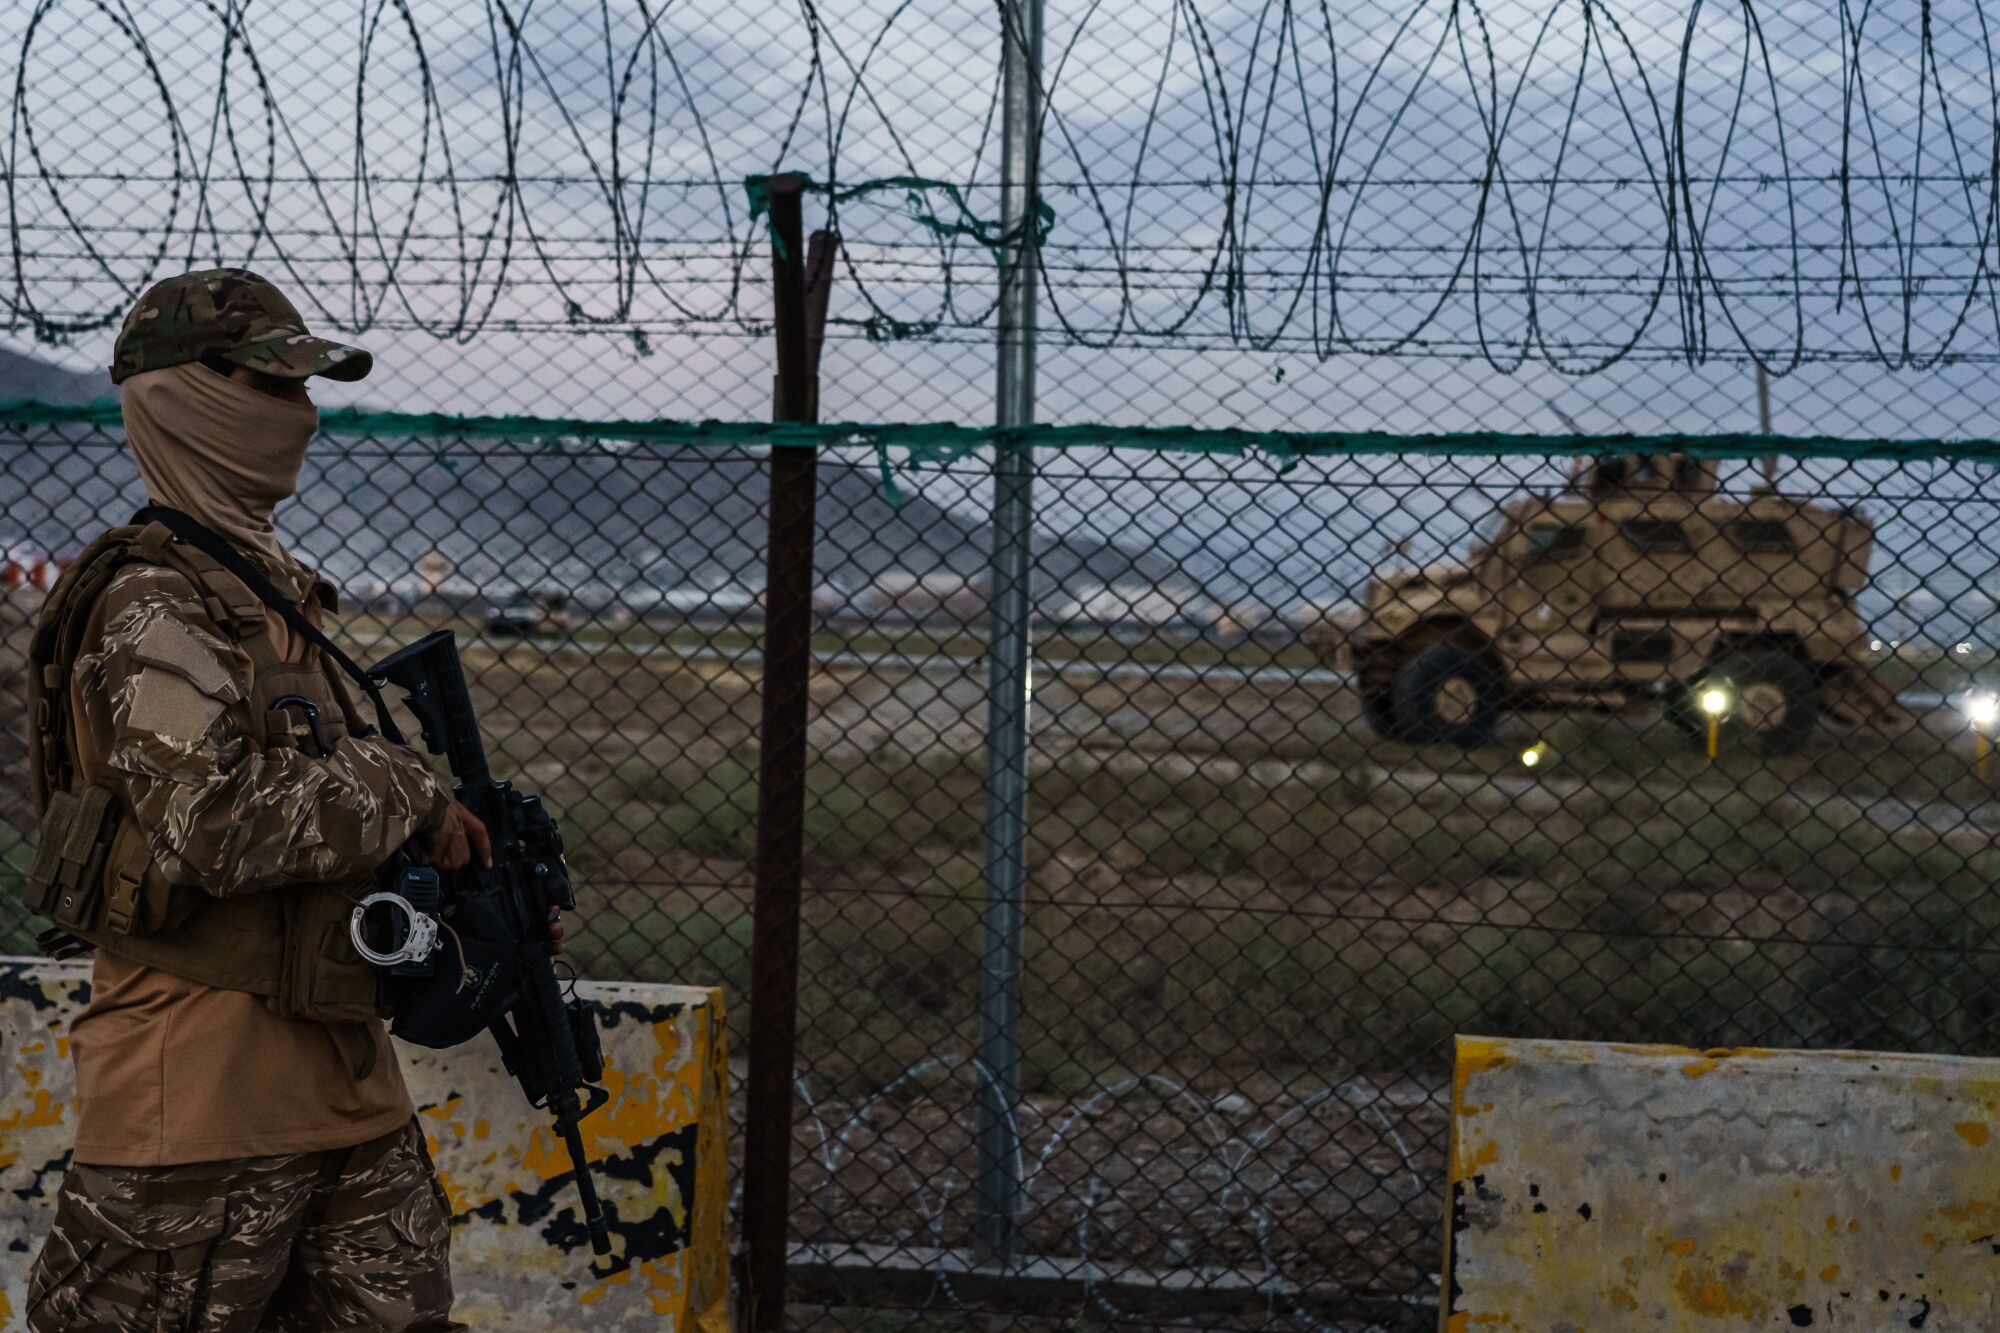 A Taliban fighter walks with a rifle outside a fence